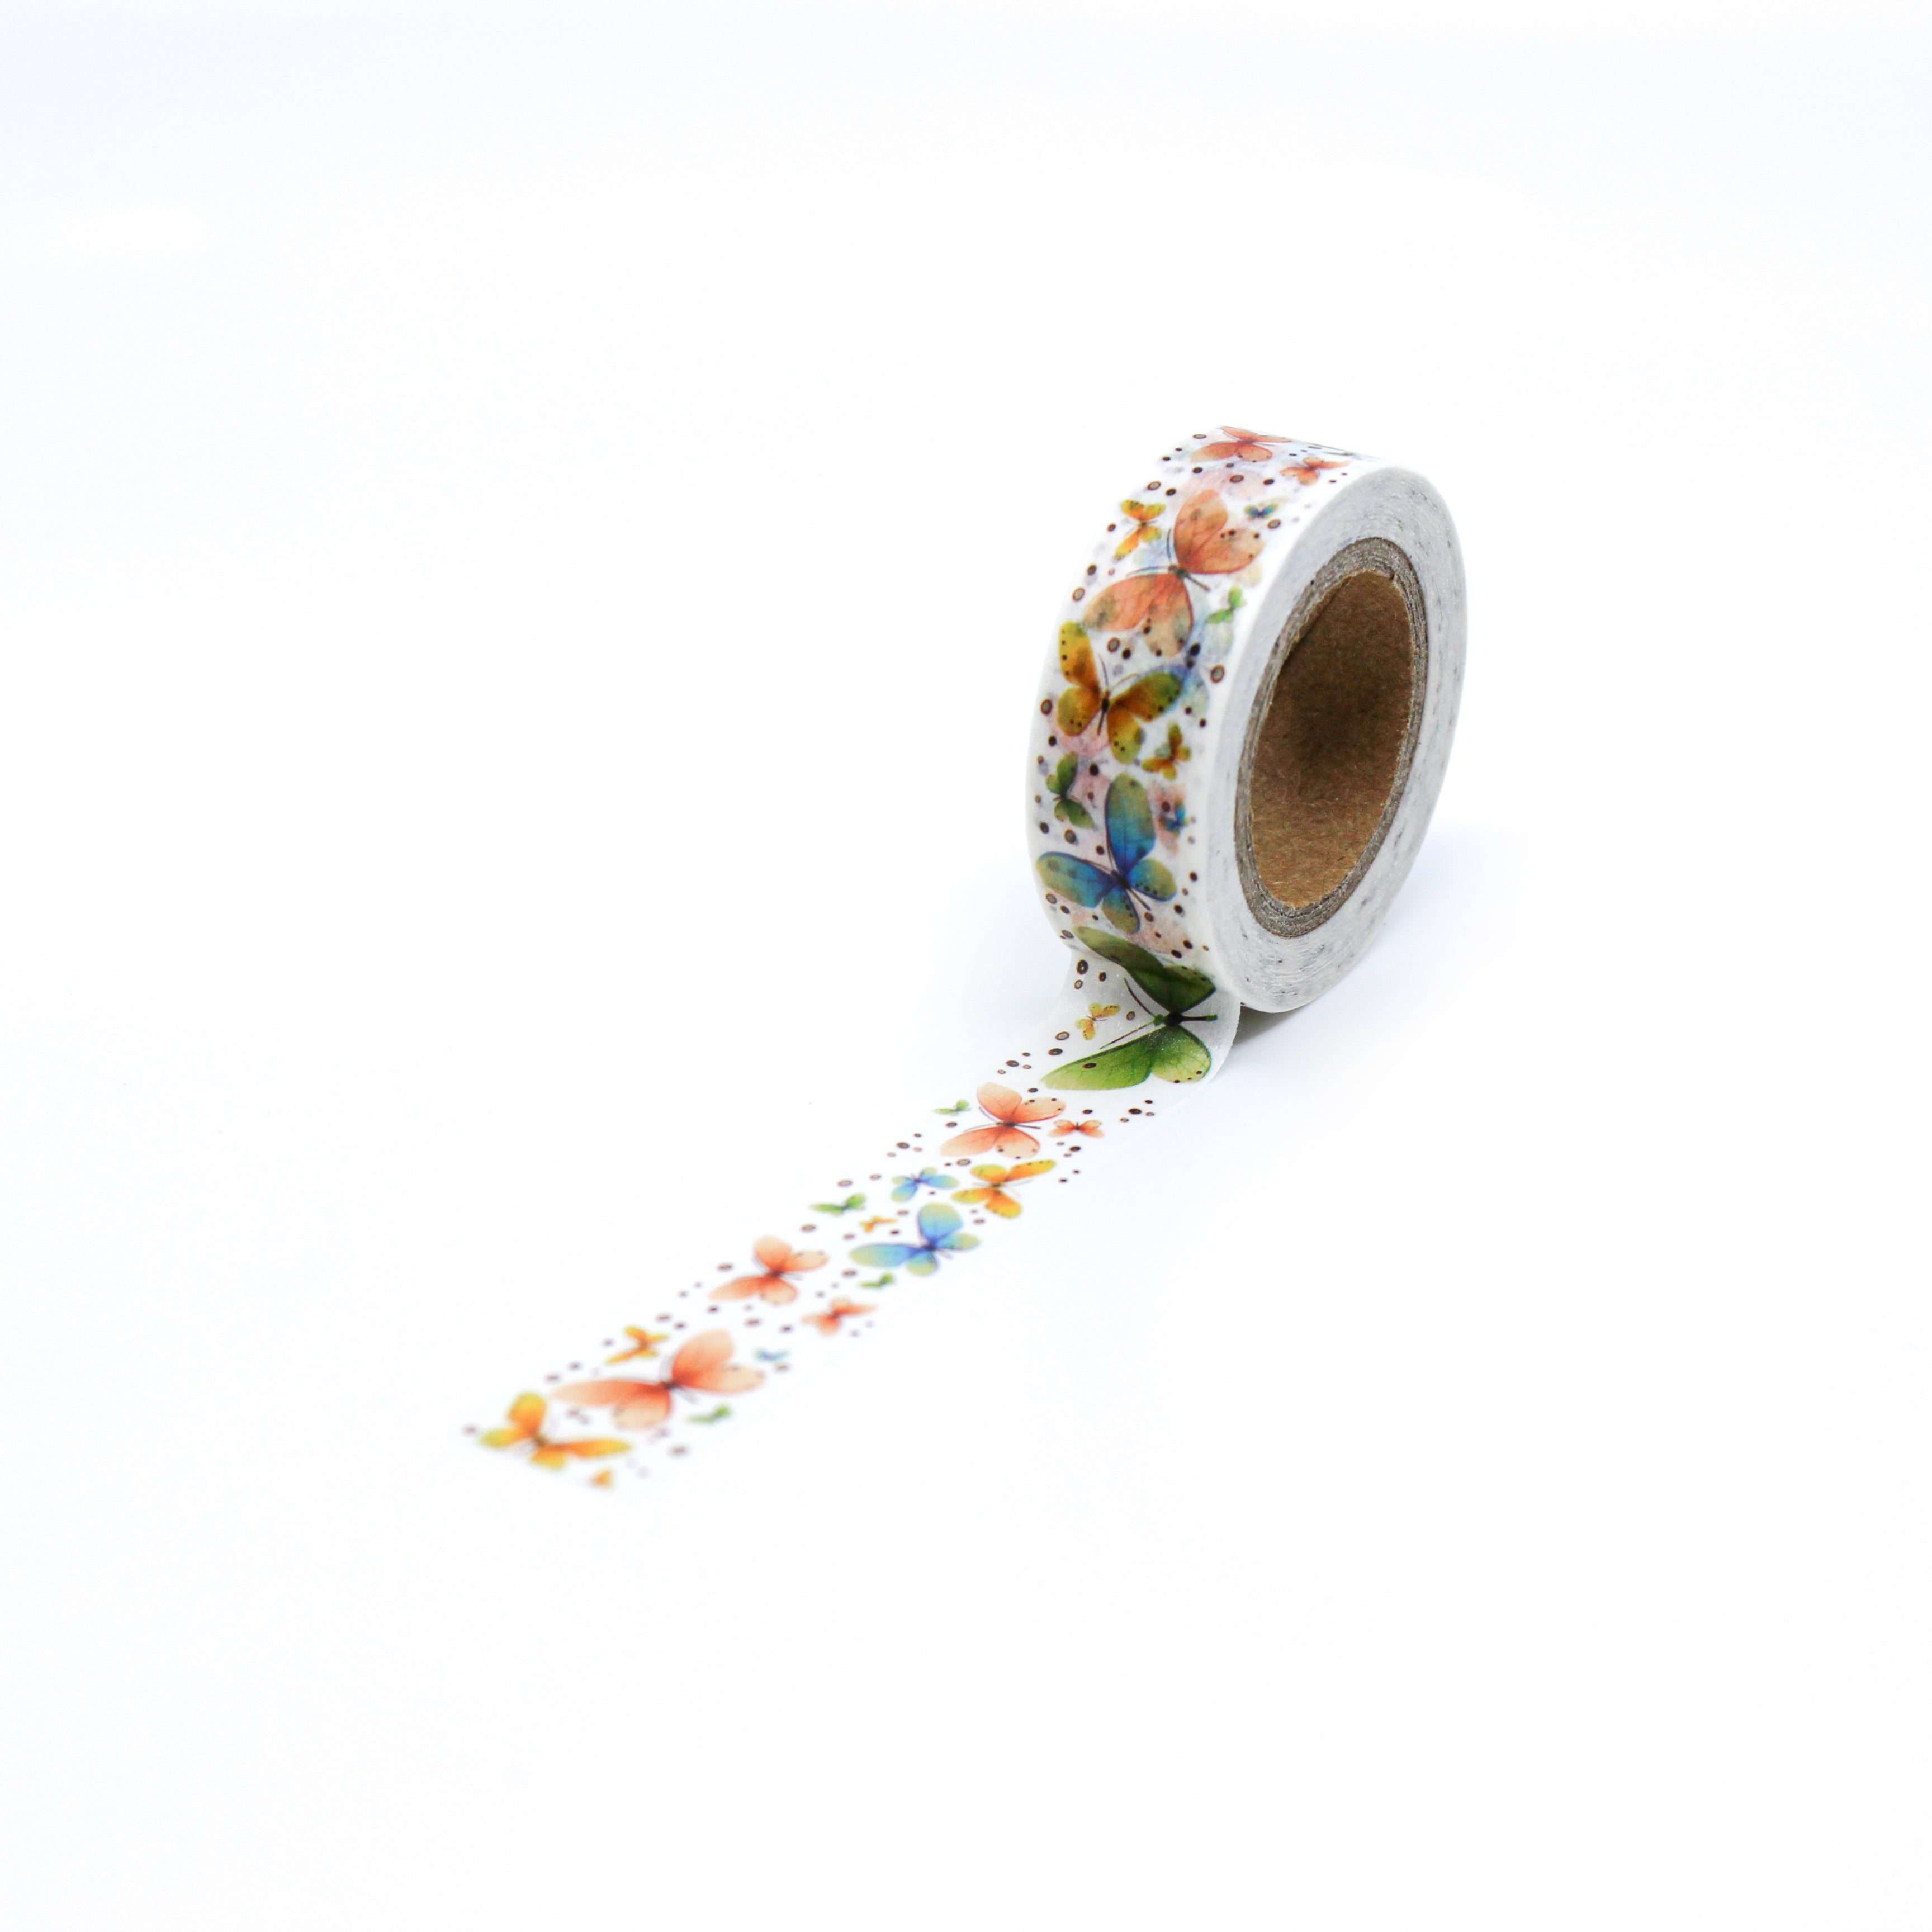 This is a full pattern repeat view of insects and bugs like colorful butterfly Washi Tape from BBB Supplies Craft Shop